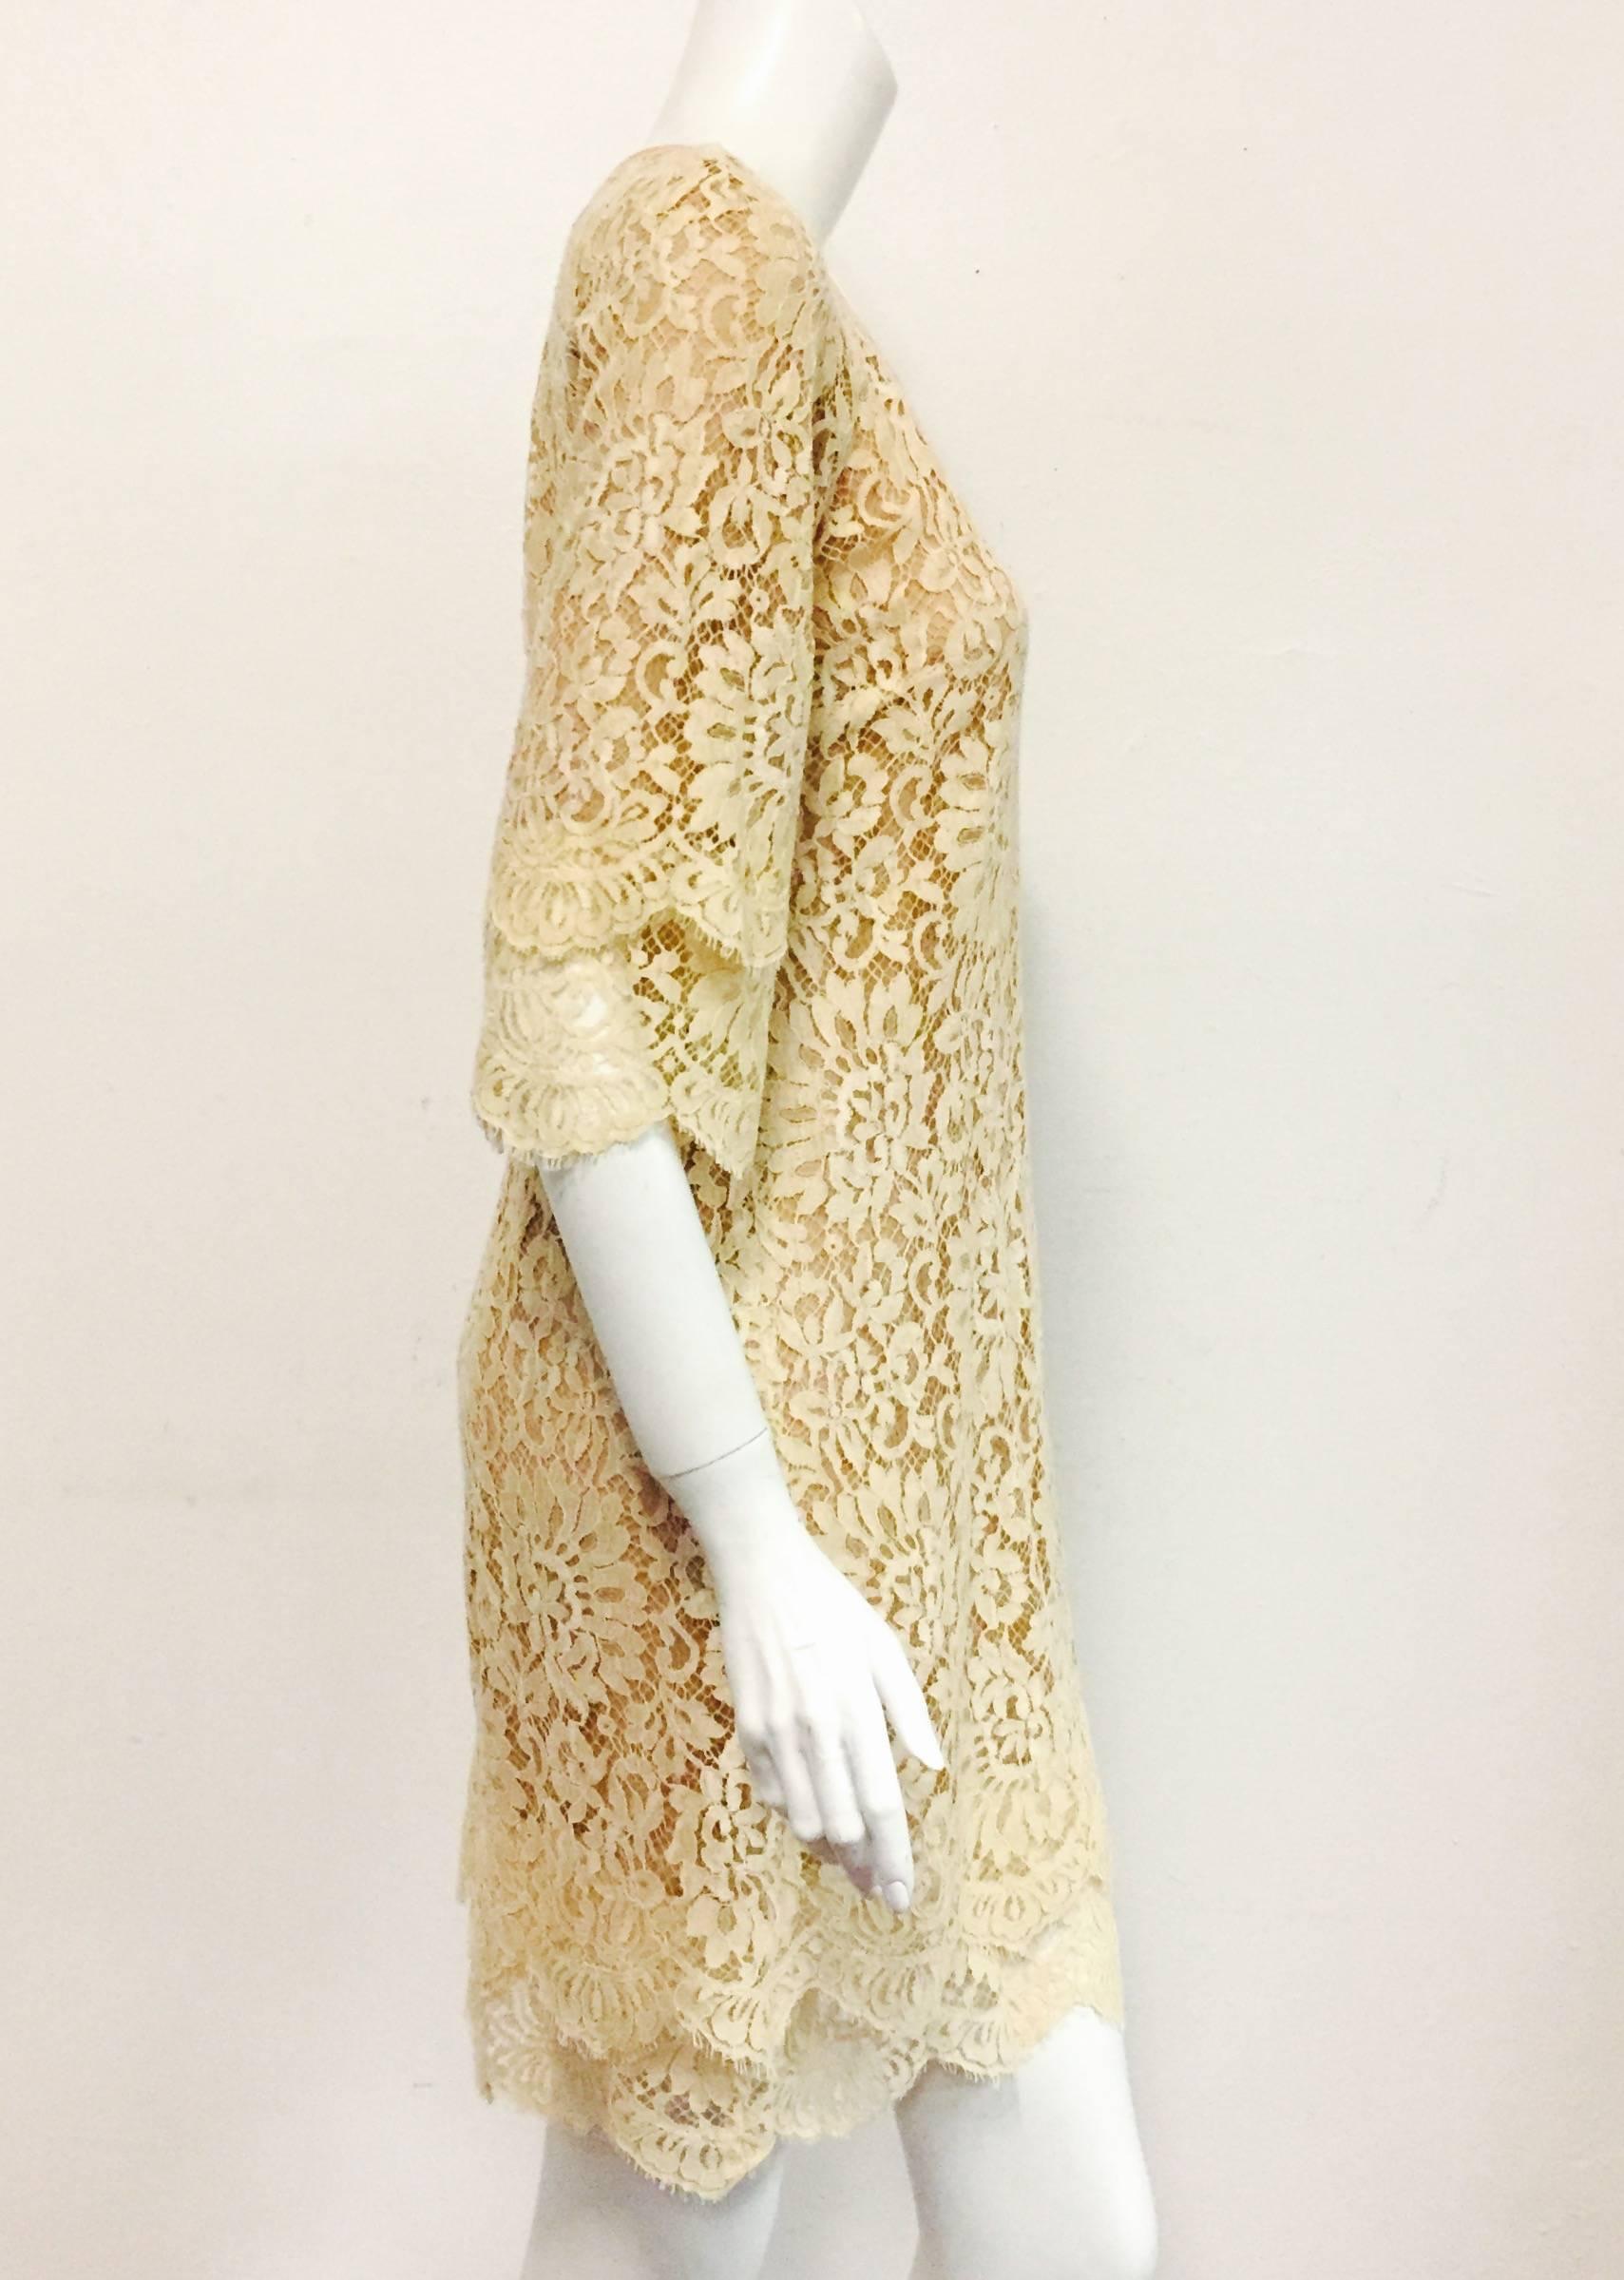 Made in Italy, this Michael Kors Beige Lace dress has a silk border around the scoop neckline and three-quarter raglan sleeves.  Optional silk ribbon may be used to cinch this ode to femininity at the waist for a more tailored look.  The 3/4 sleeves